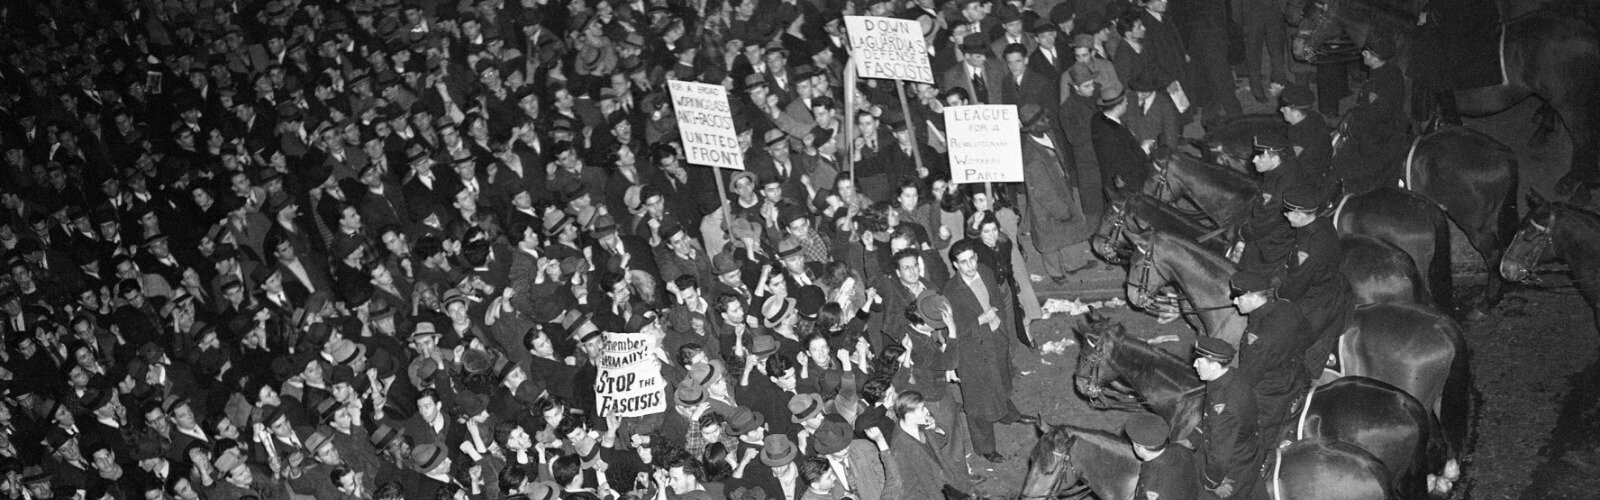 In 1939, New York's mounted police form a solid line outside Madison Square Garden to hold in a crowd that had packed the streets around the venue where the fascist German American Bund was holding a rally.